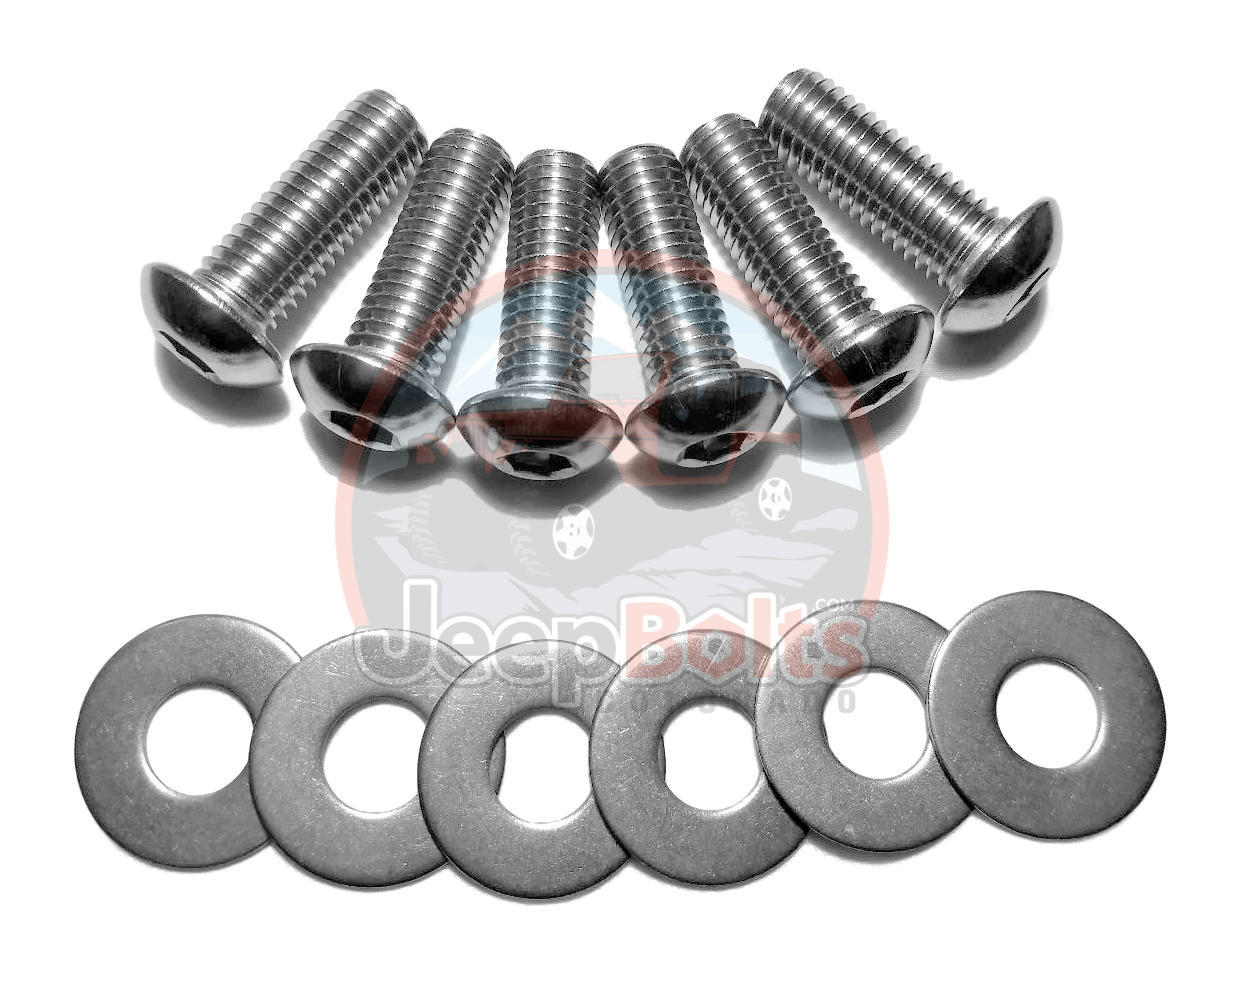 Jeep TJ & LJ Wrangler Front Standard Bumper Bolts NO TOW HOOK Stainless Steel Set 12 pc